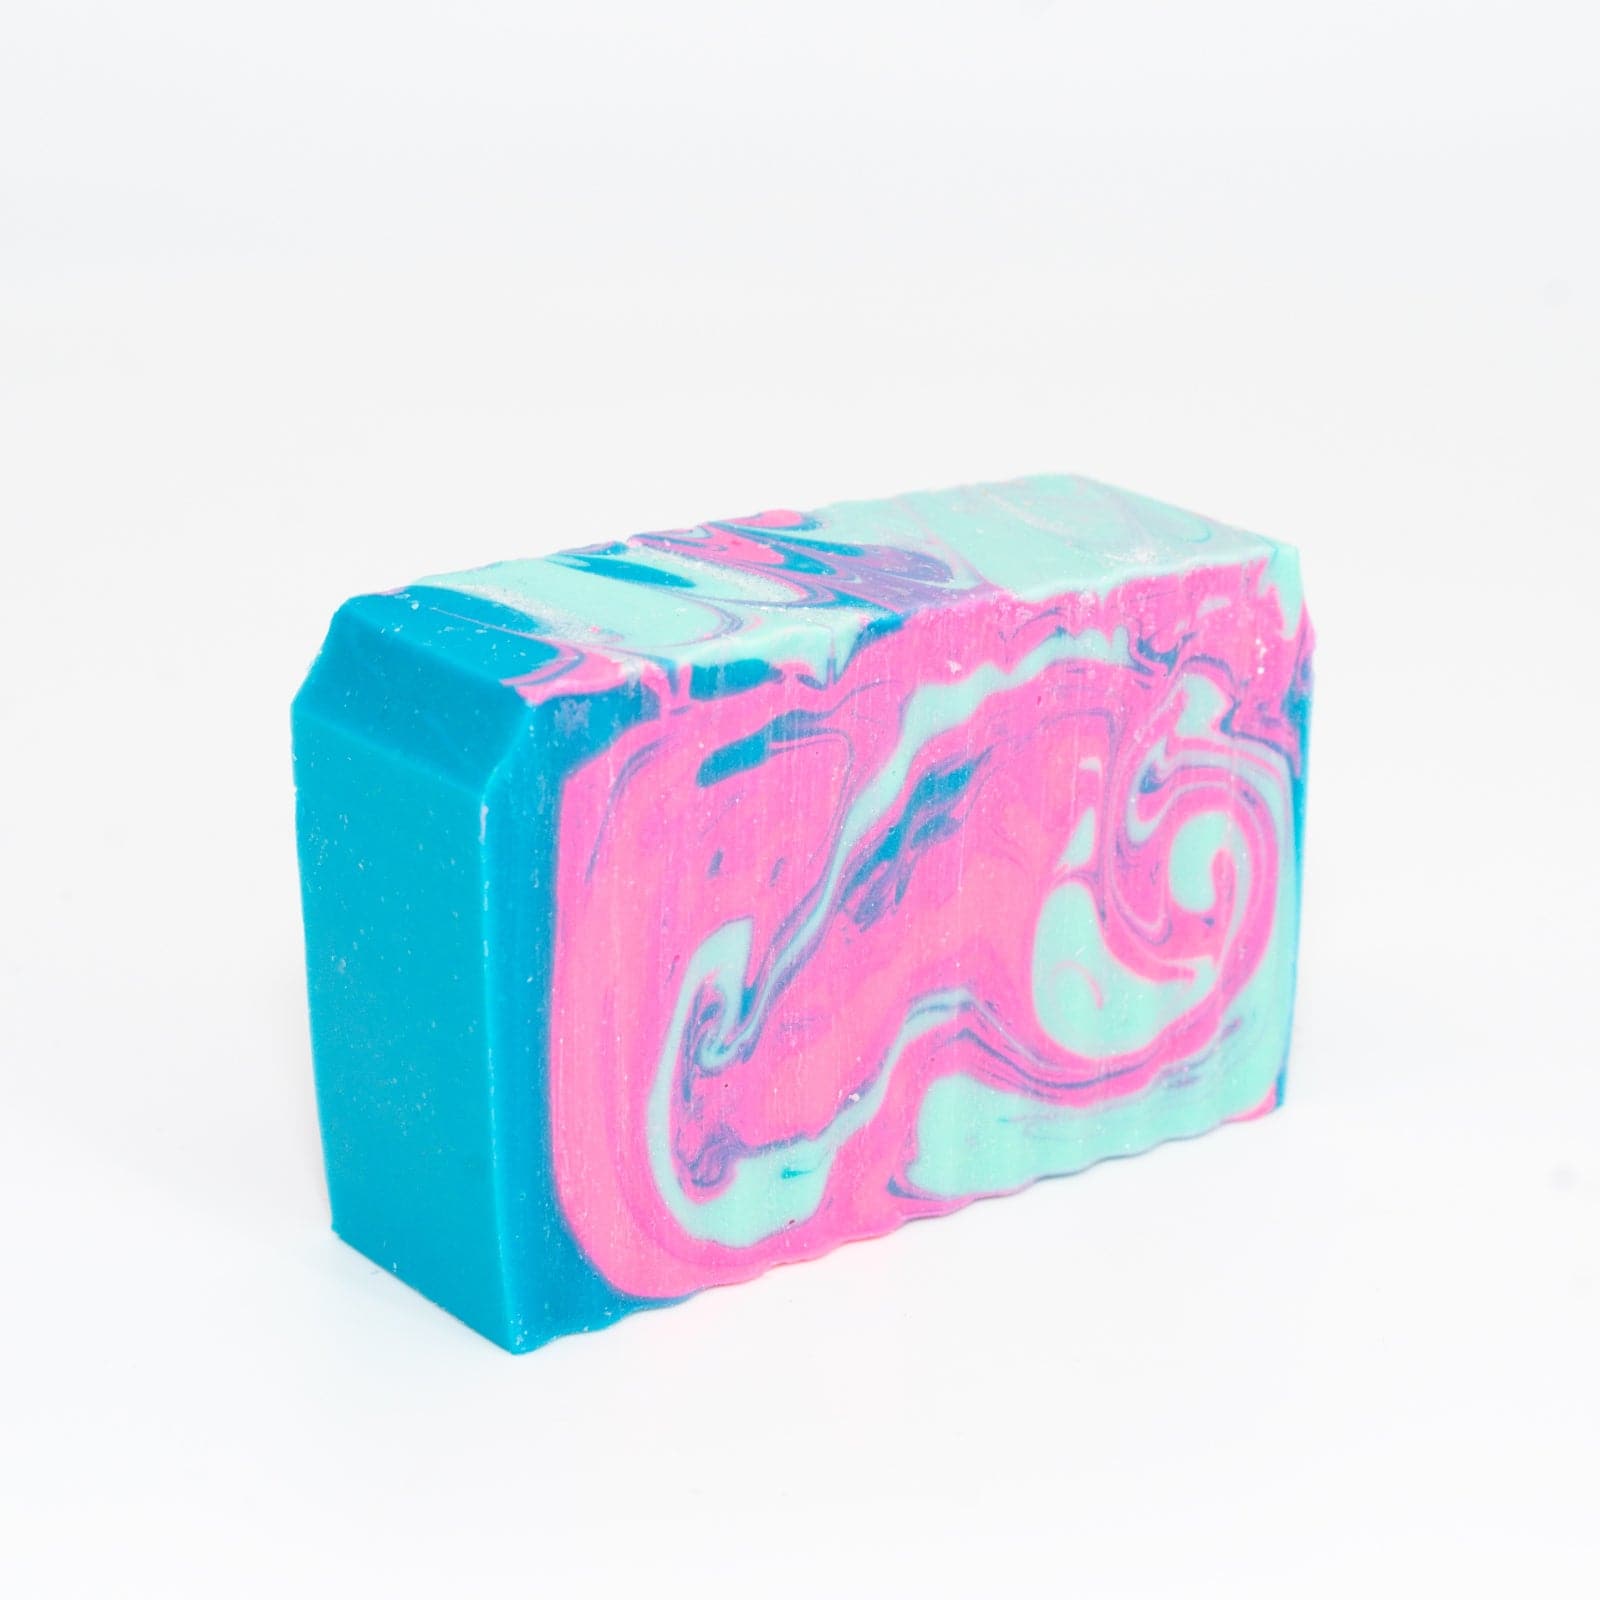 angled right view of blue, light blue, and pink bar of Mermaid soap